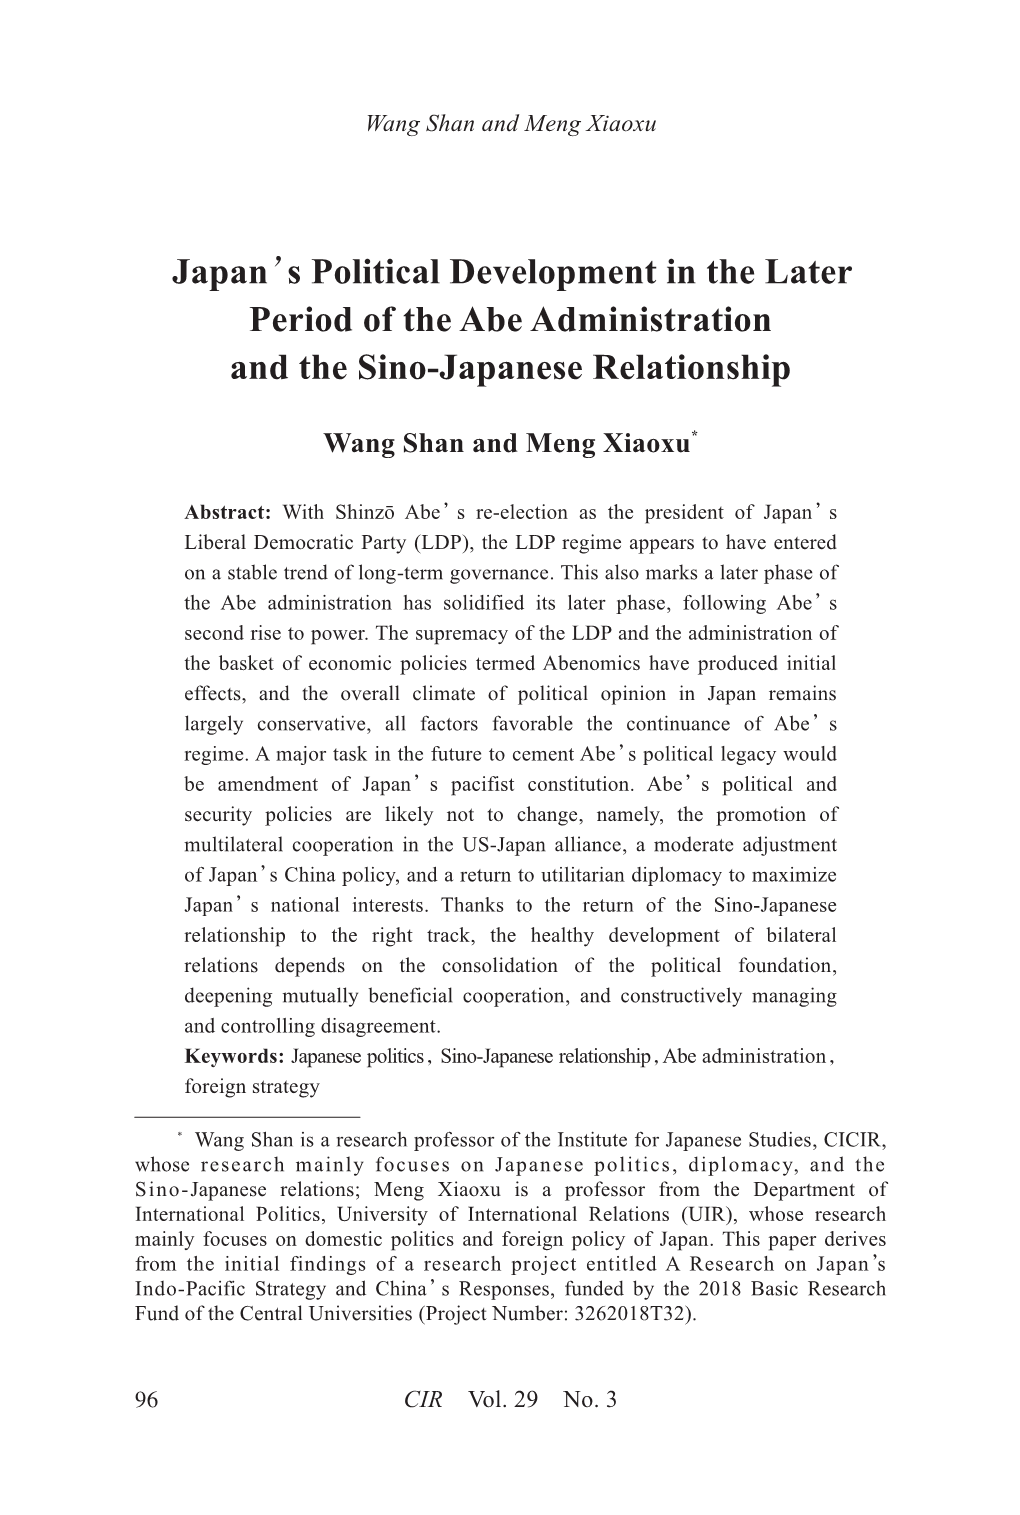 Japan's Political Development in the Later Period of the Abe